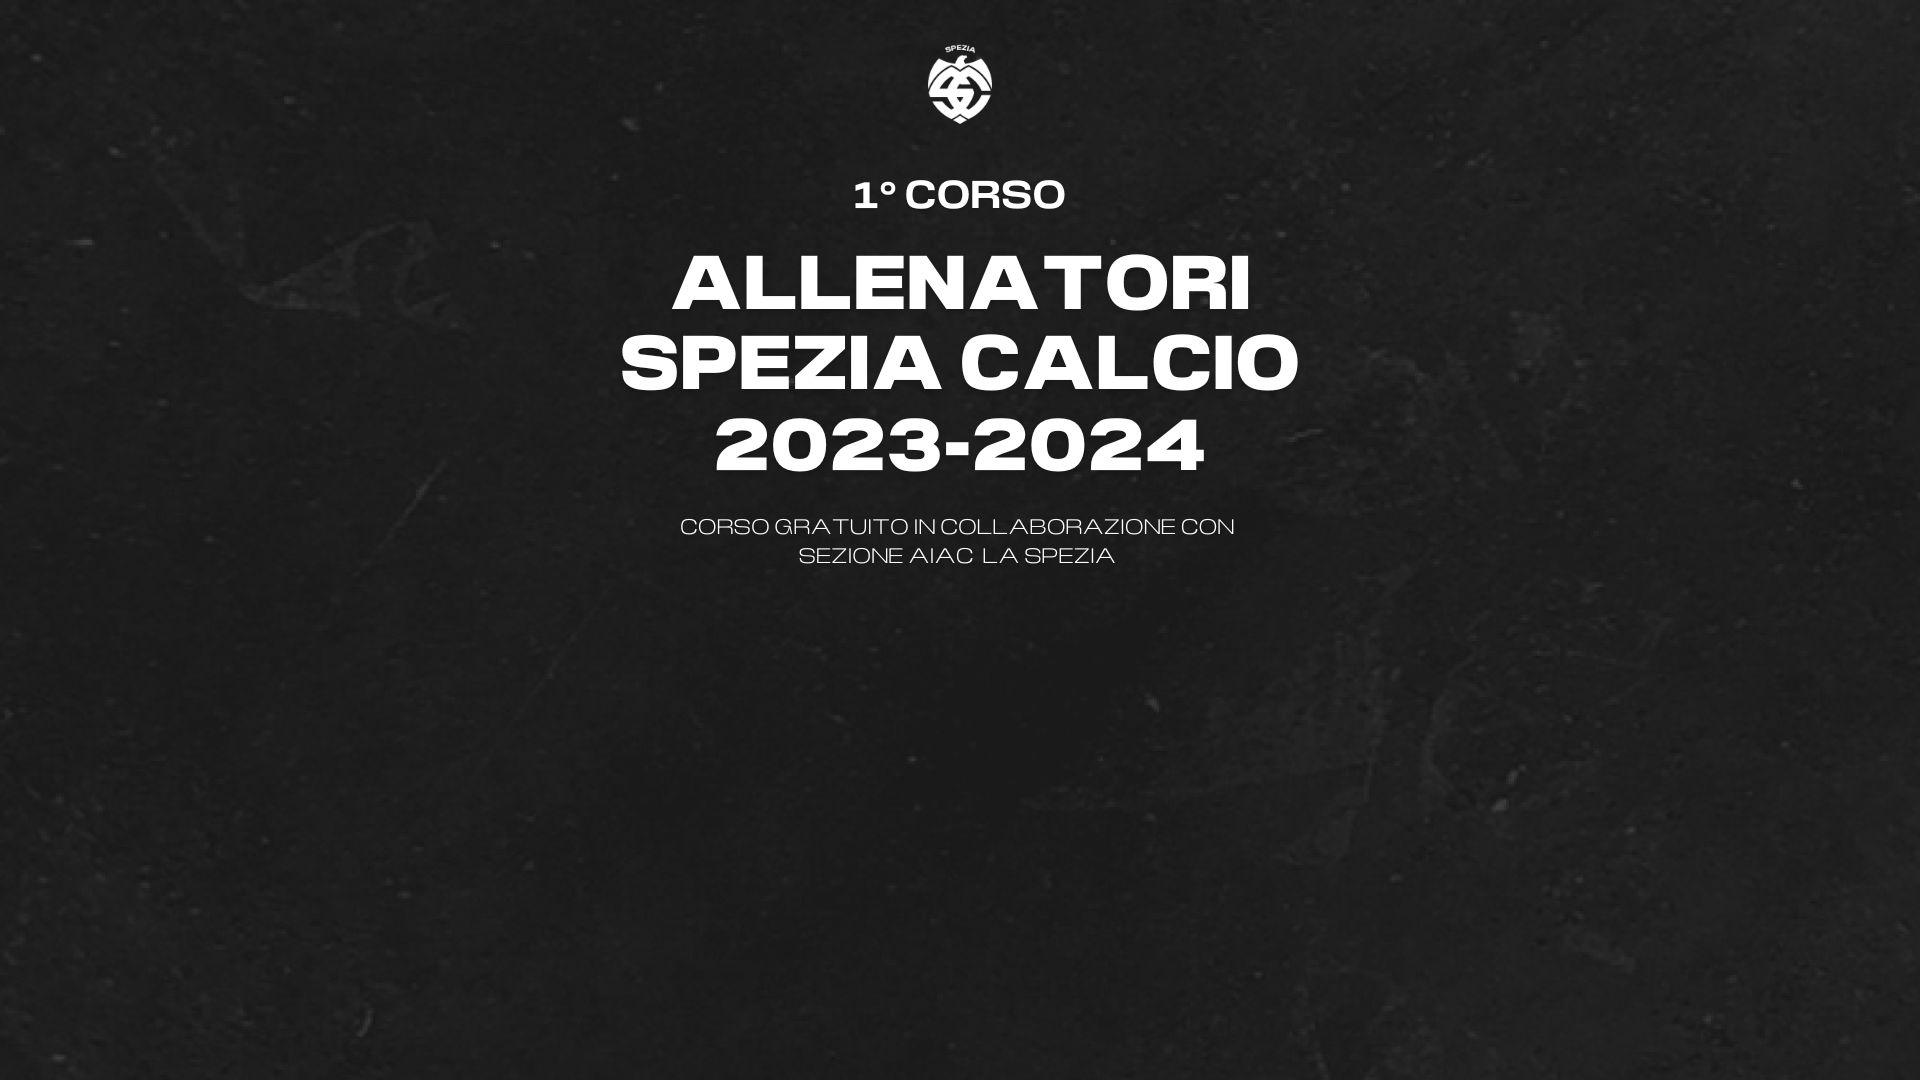 Sold out for the first Spezia Football Coaches Course 2023-2024